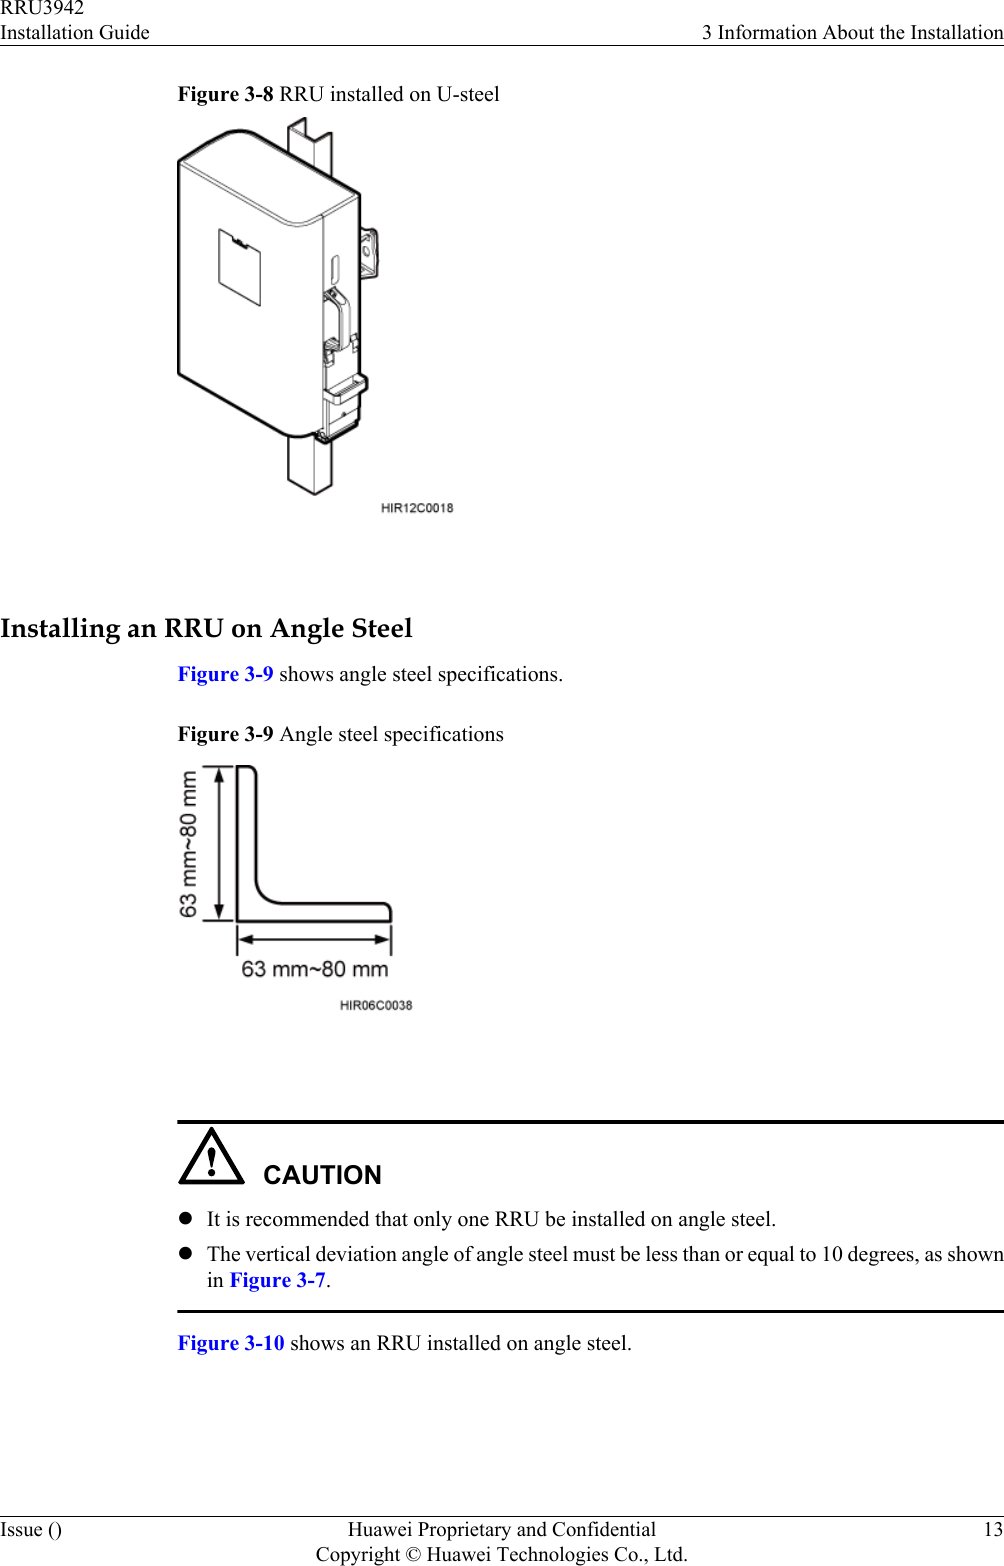 Figure 3-8 RRU installed on U-steel Installing an RRU on Angle SteelFigure 3-9 shows angle steel specifications.Figure 3-9 Angle steel specifications CAUTIONlIt is recommended that only one RRU be installed on angle steel.lThe vertical deviation angle of angle steel must be less than or equal to 10 degrees, as shownin Figure 3-7.Figure 3-10 shows an RRU installed on angle steel.RRU3942Installation Guide 3 Information About the InstallationIssue () Huawei Proprietary and ConfidentialCopyright © Huawei Technologies Co., Ltd.13